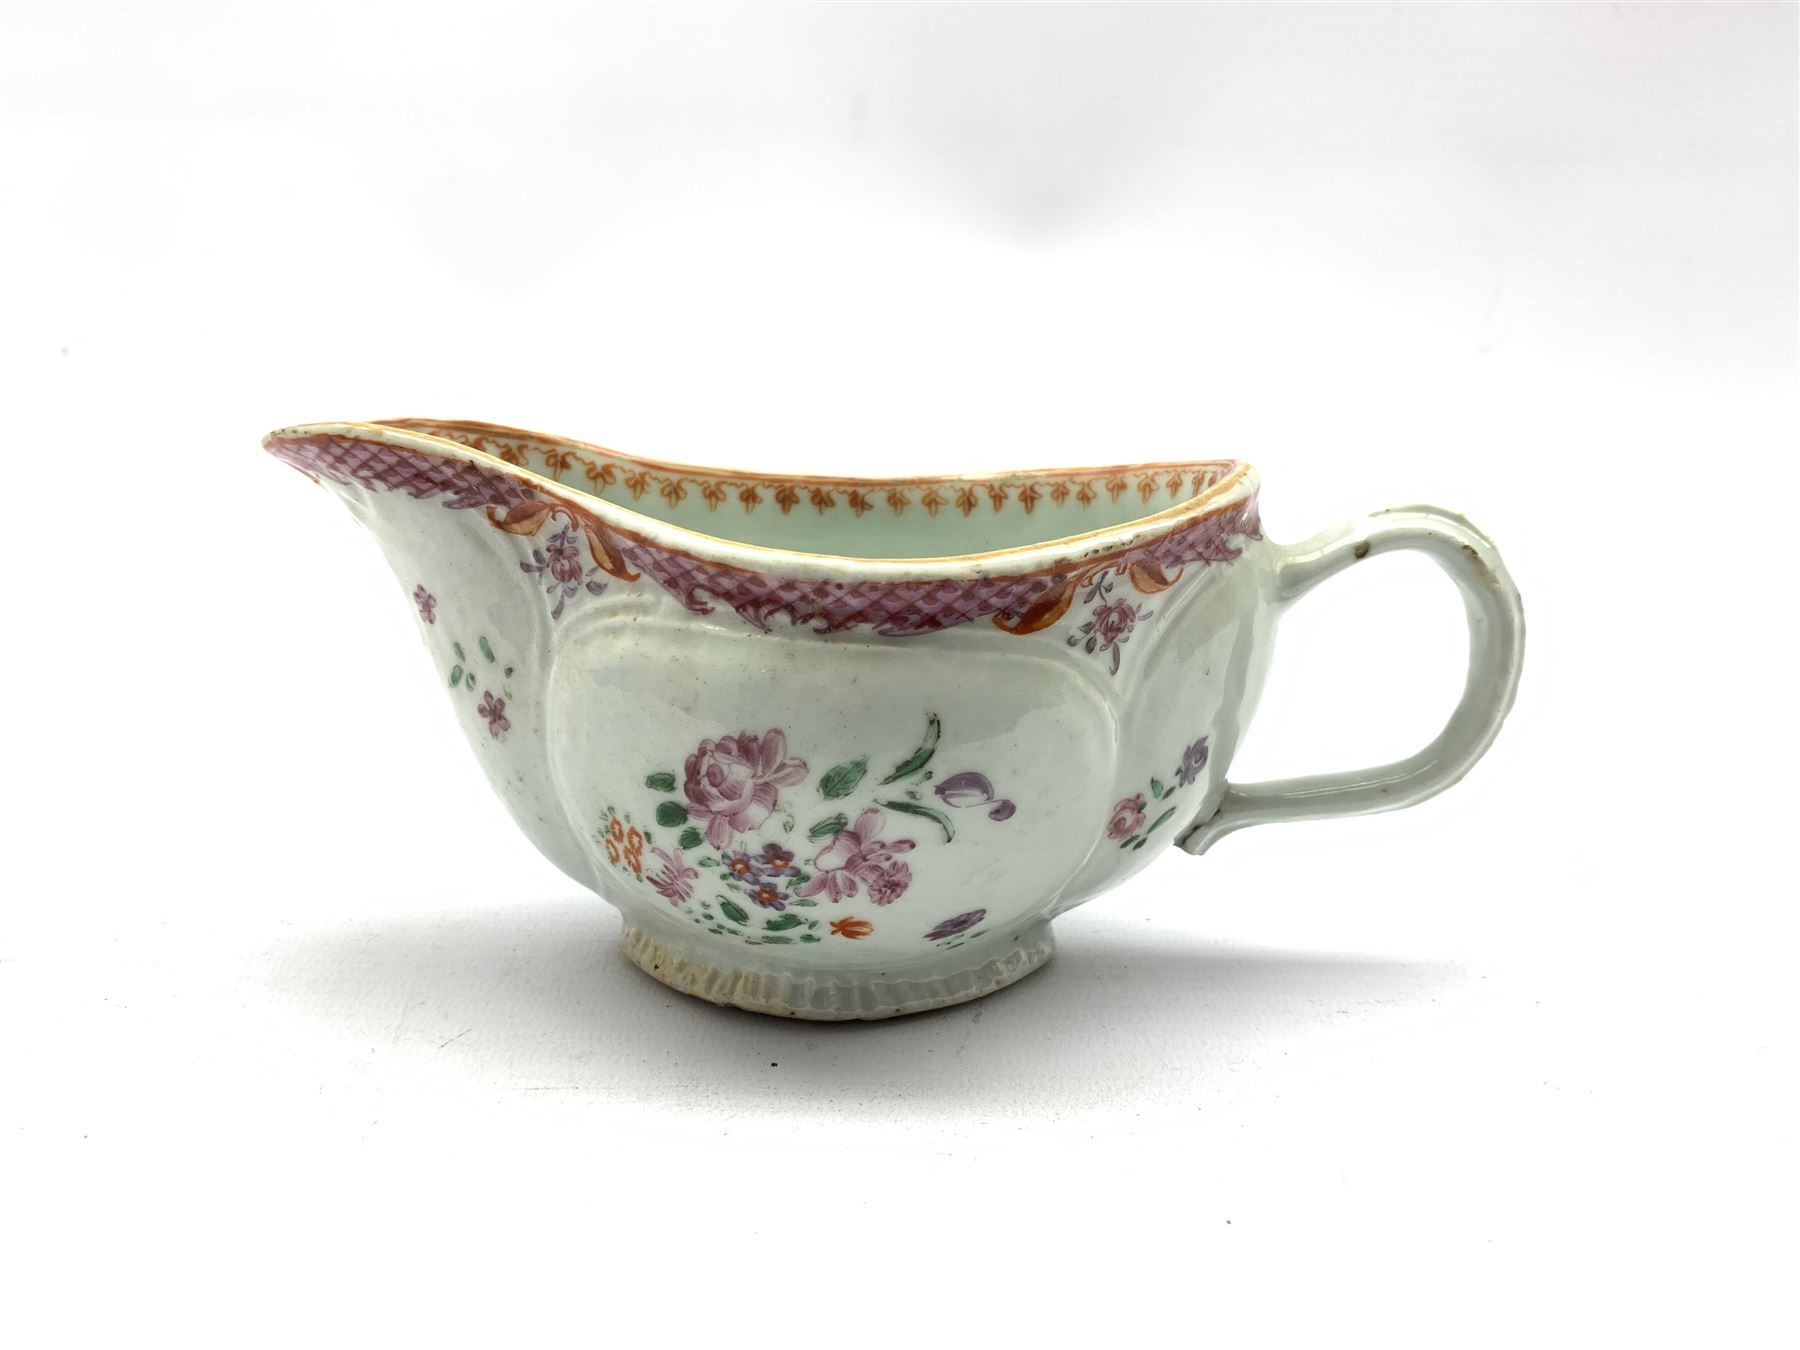 18th century porcelain sauceboat hand-painted with floral sprays beneath a pink scale border - Image 2 of 4